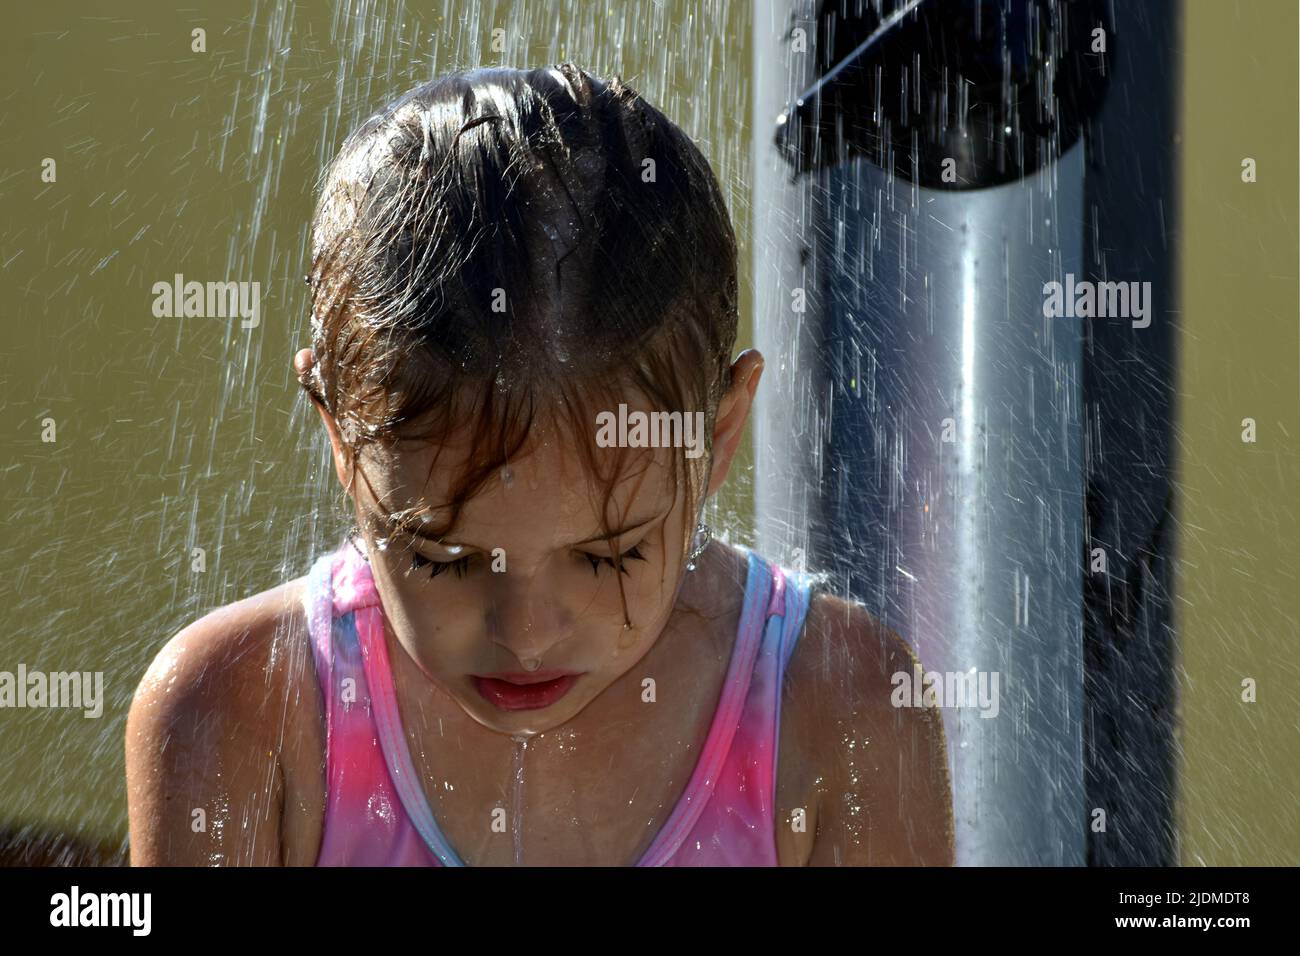 Child cooling down under an outside shower during hot weather in summertime Stock Photo